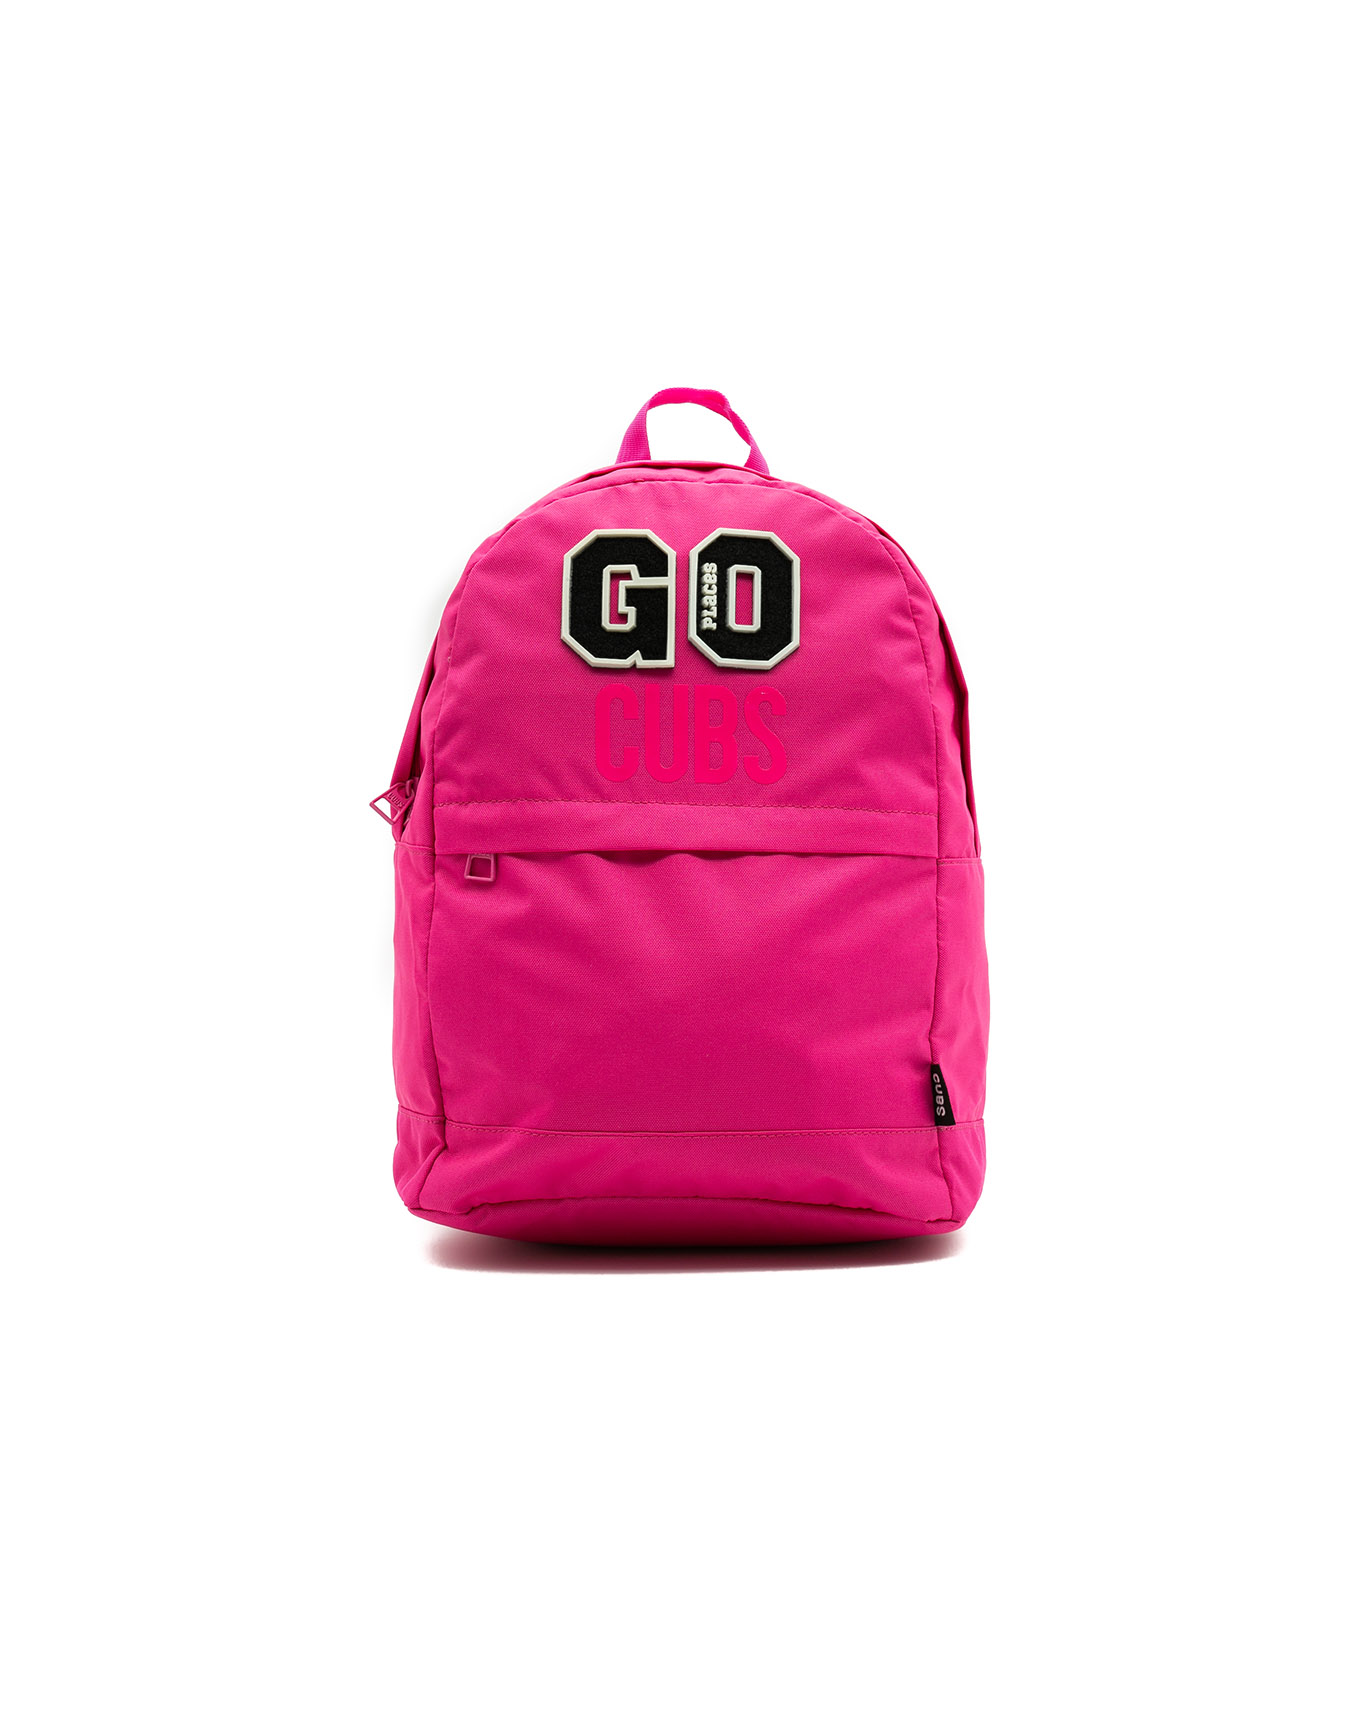 Go Large Backpack Pink | CUBS | Go Places